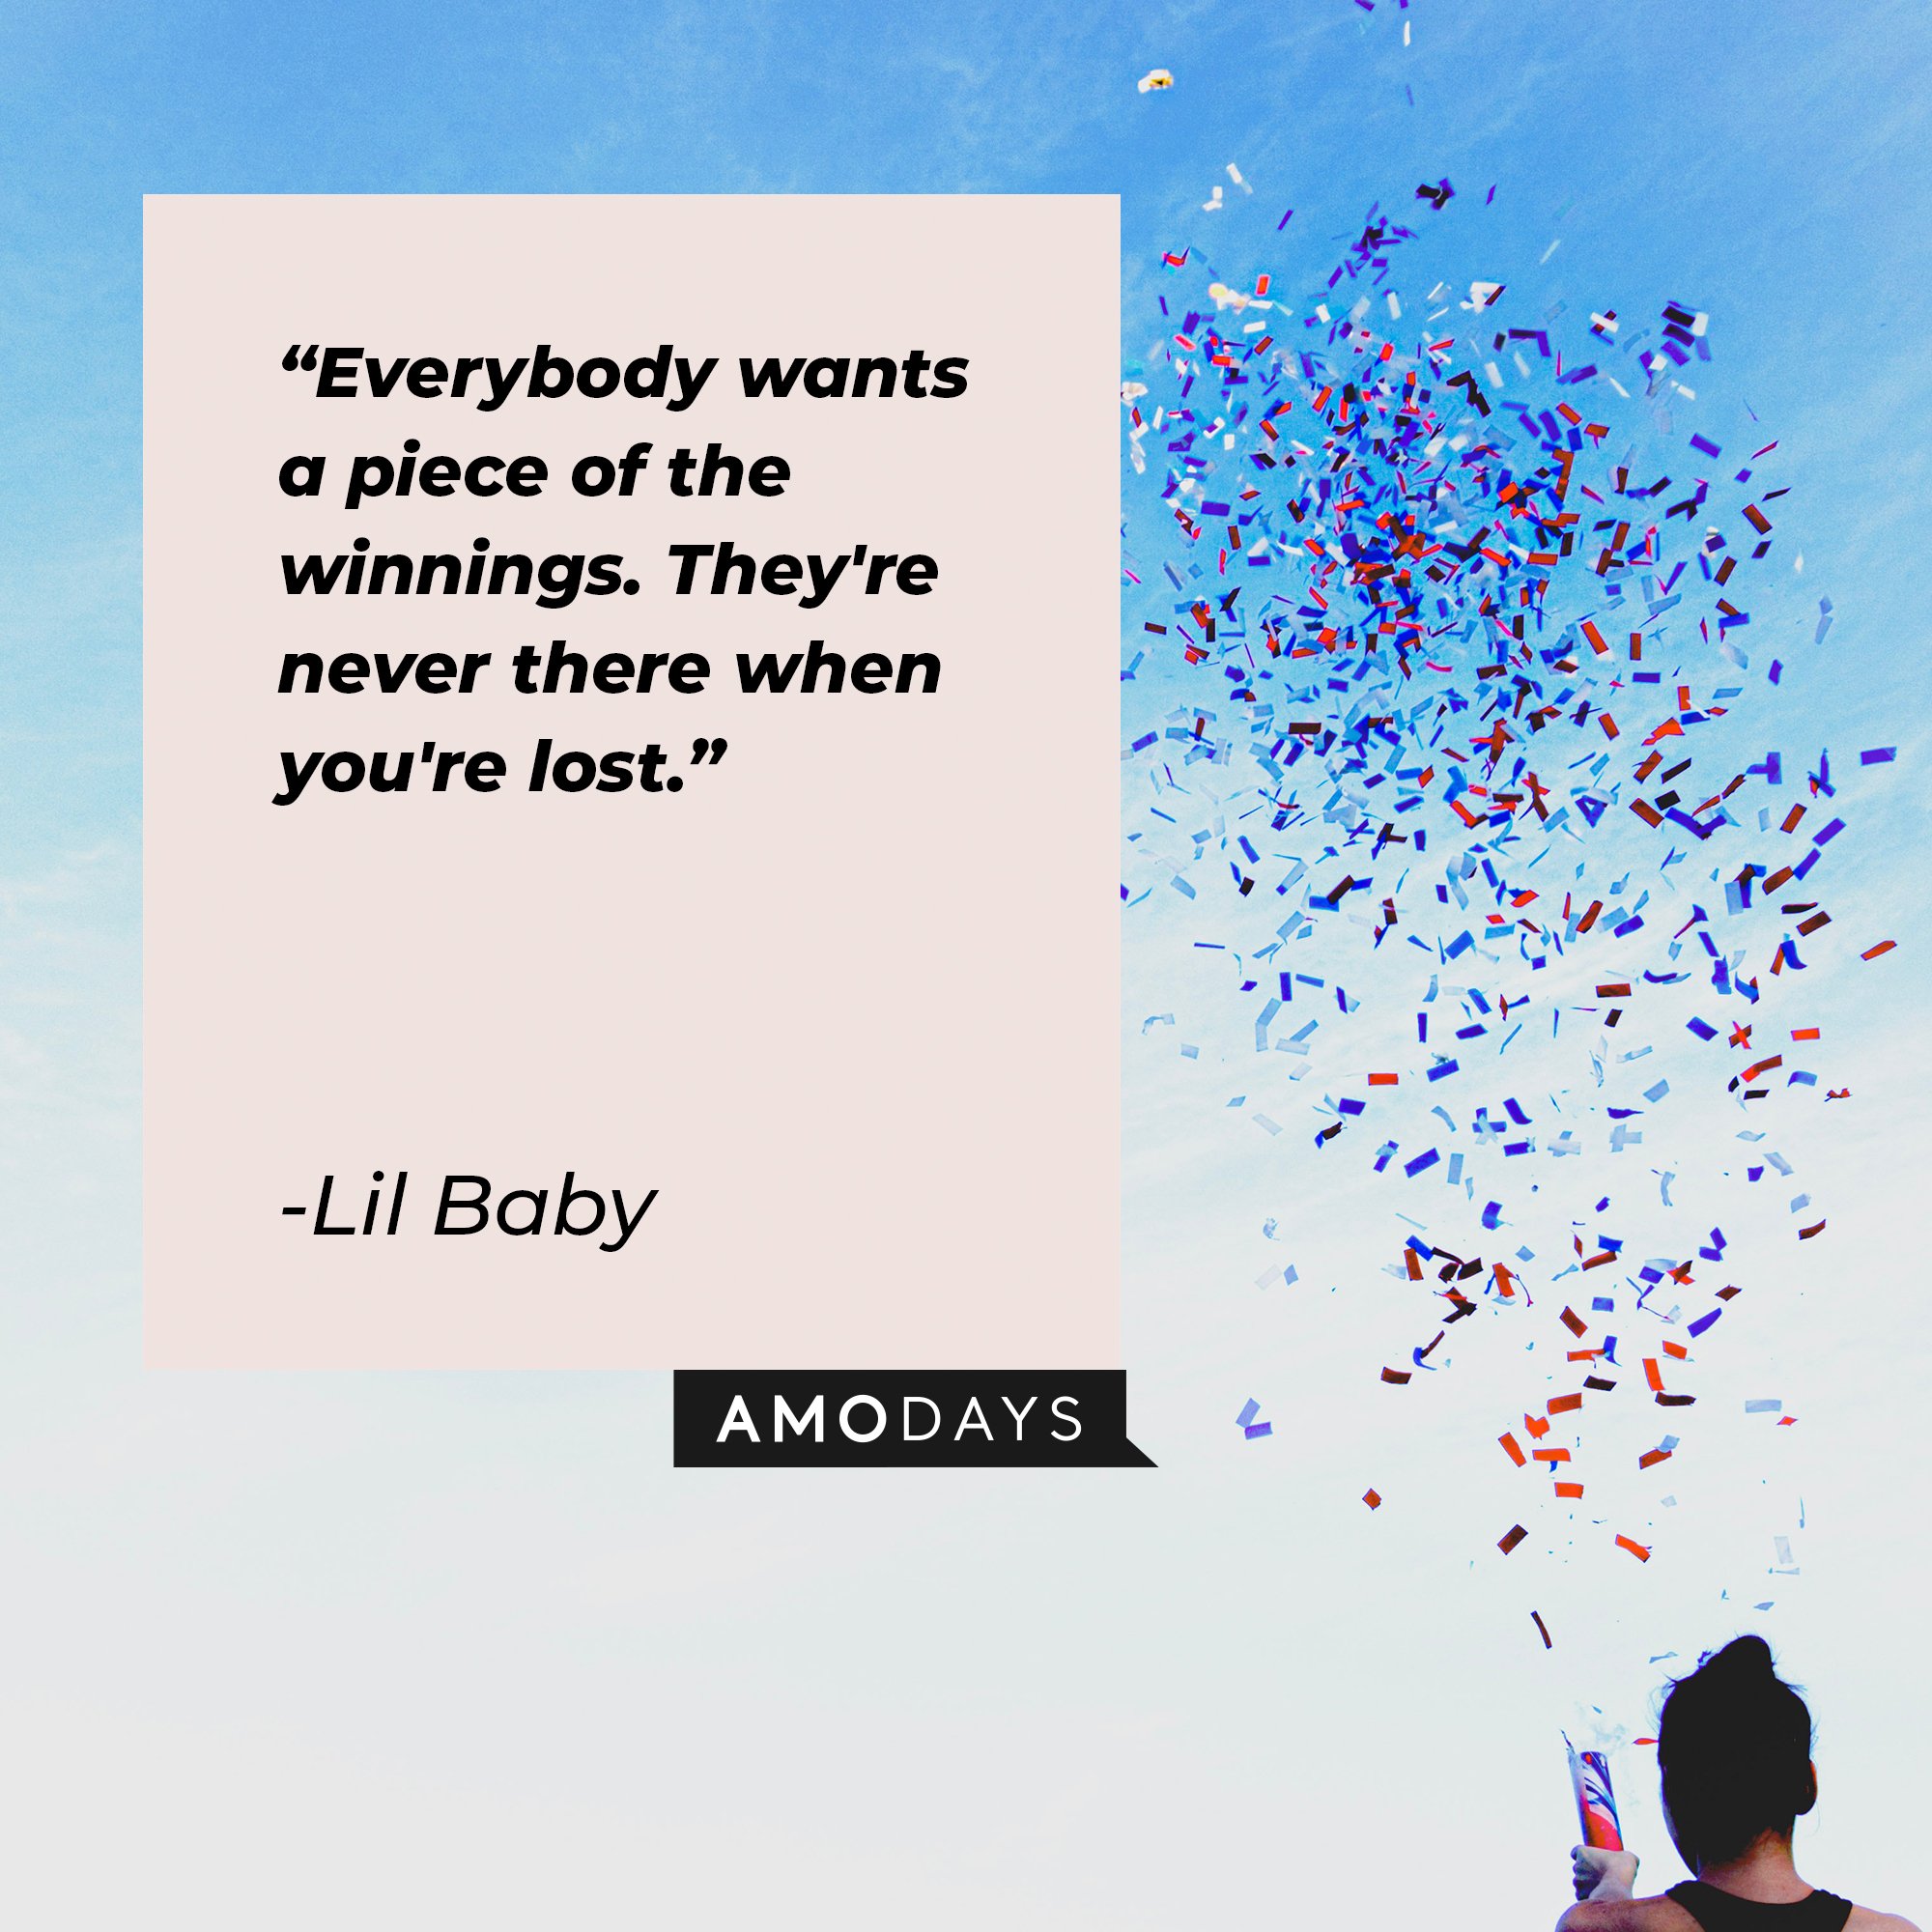 Lil Baby’s quote: "Everybody wants a piece of the winnings. They're never there when you're lost." | Image: AmoDays